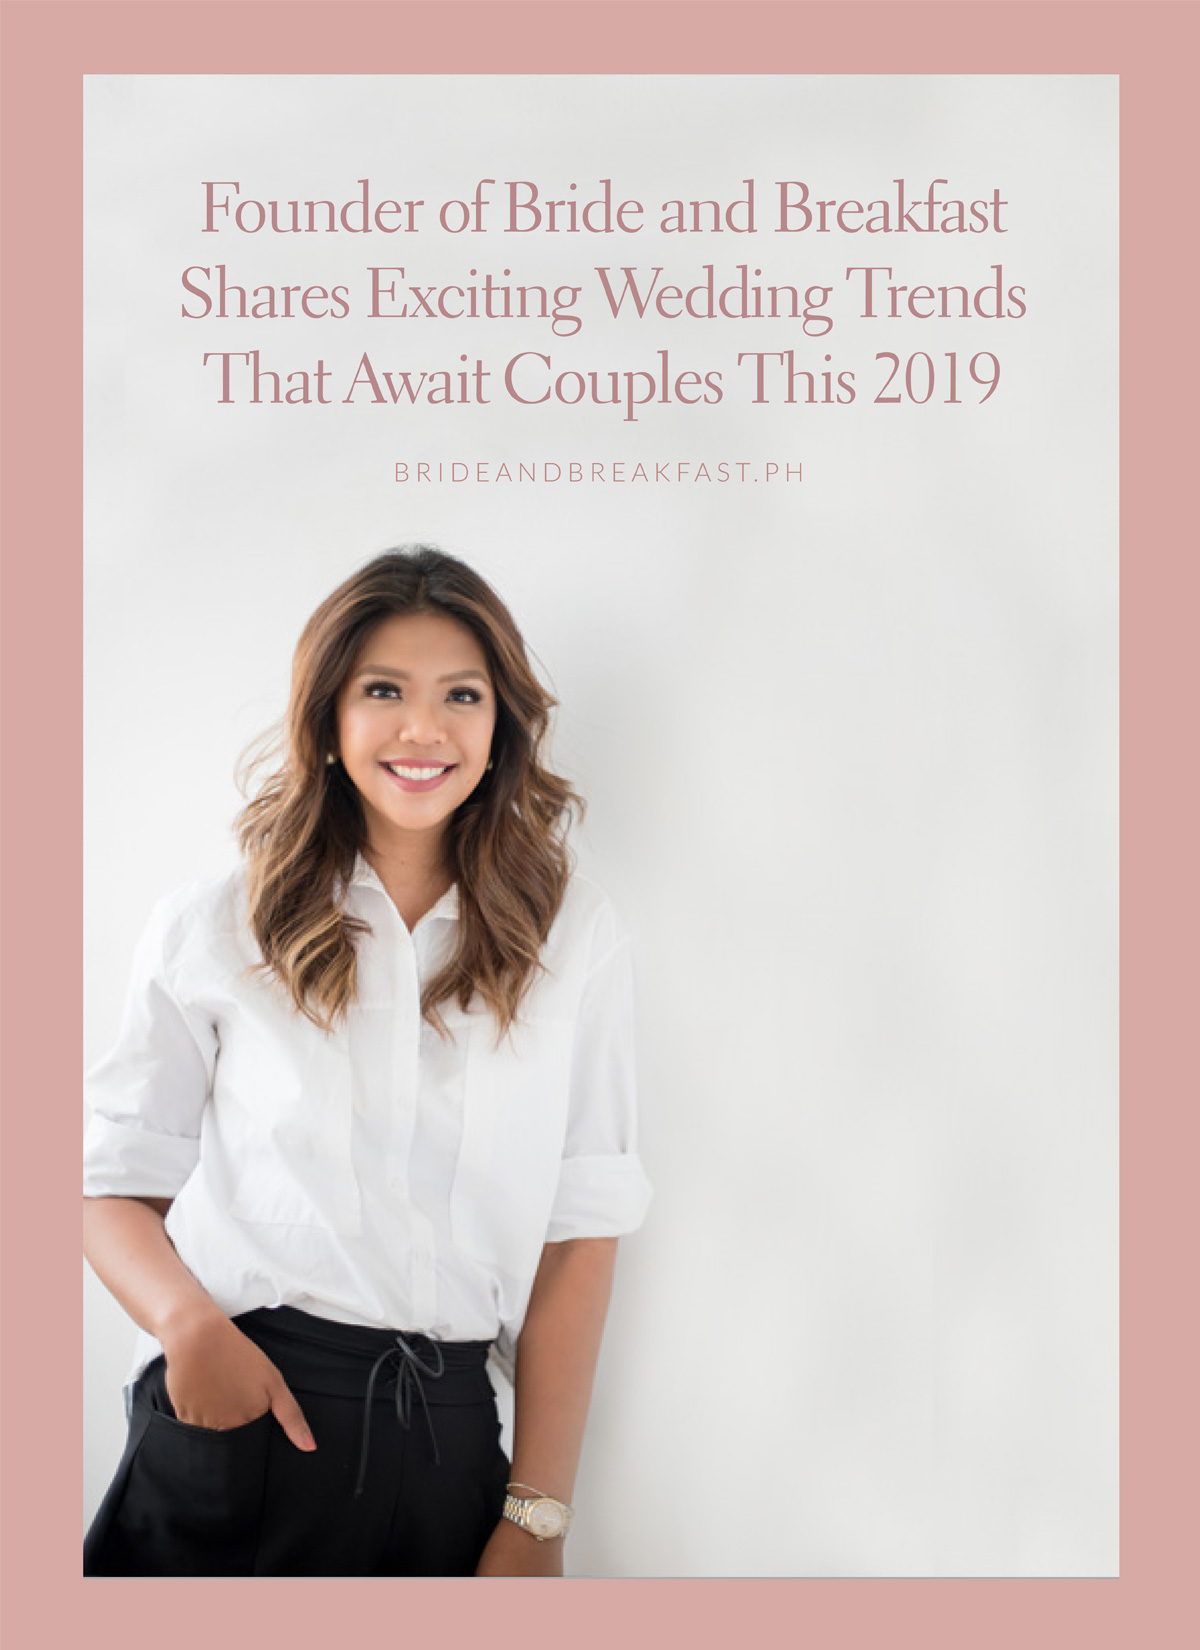 Founder of Bride and Breakfast Shares Exciting Wedding Trends That Await Couples This 2019